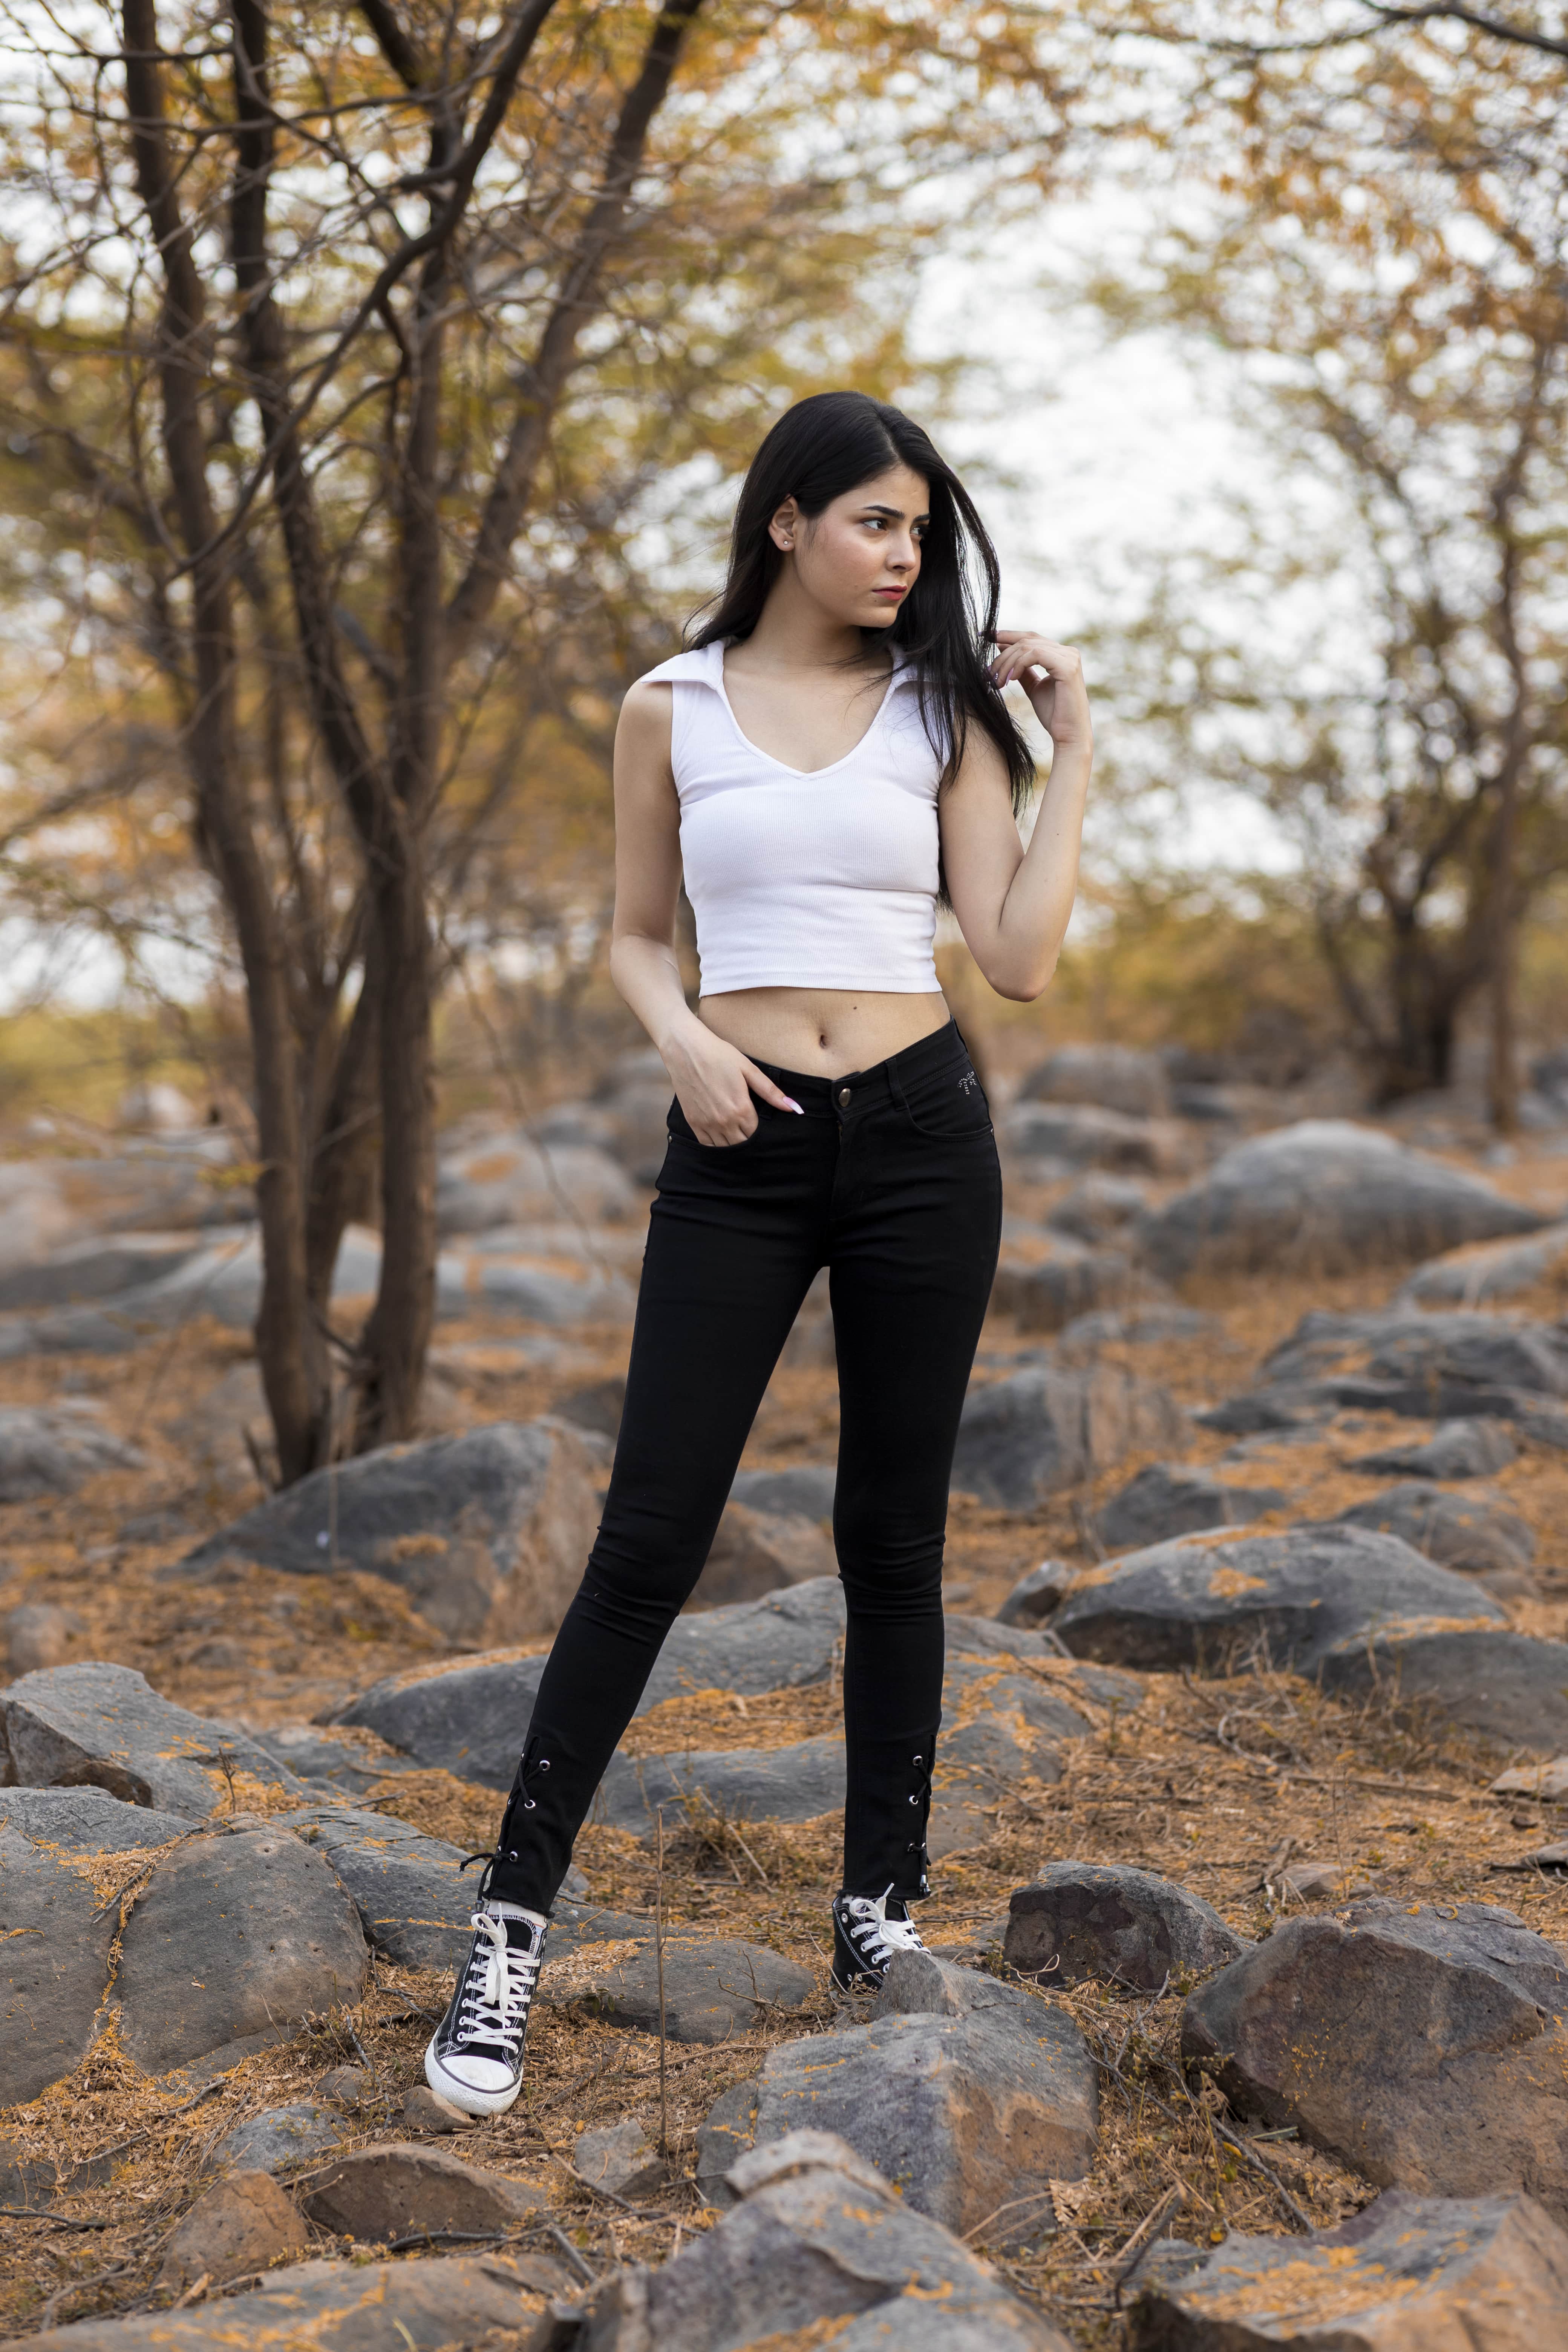 Photo poses for girl in jeans top in India | Clasf fashion